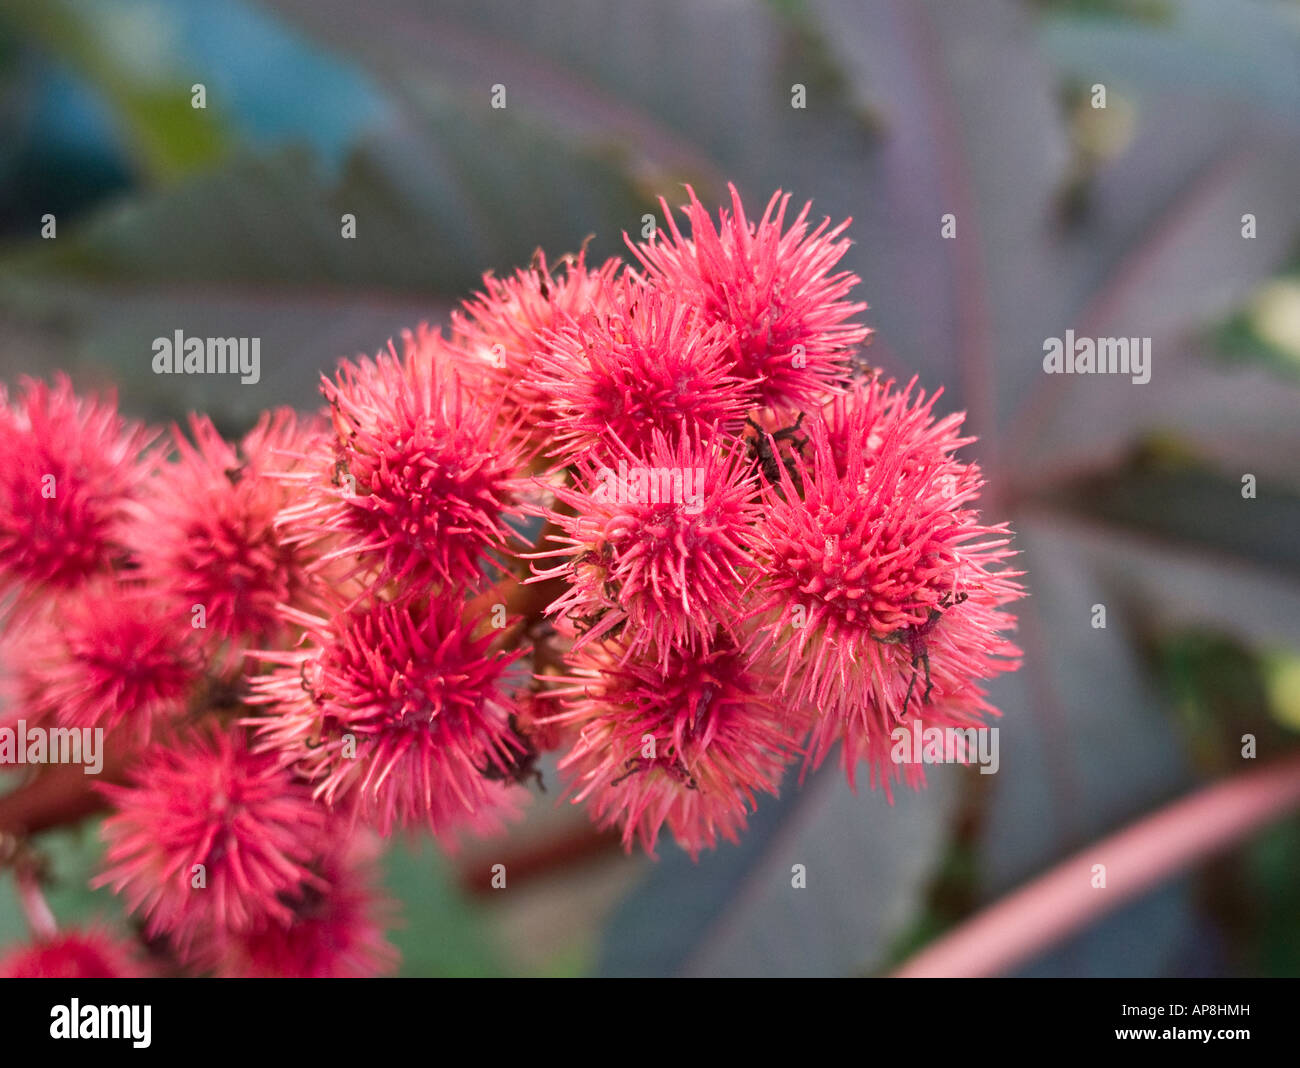 Prickly ovoid capsules of ricinus communis or castor oil plant growing in England Stock Photo